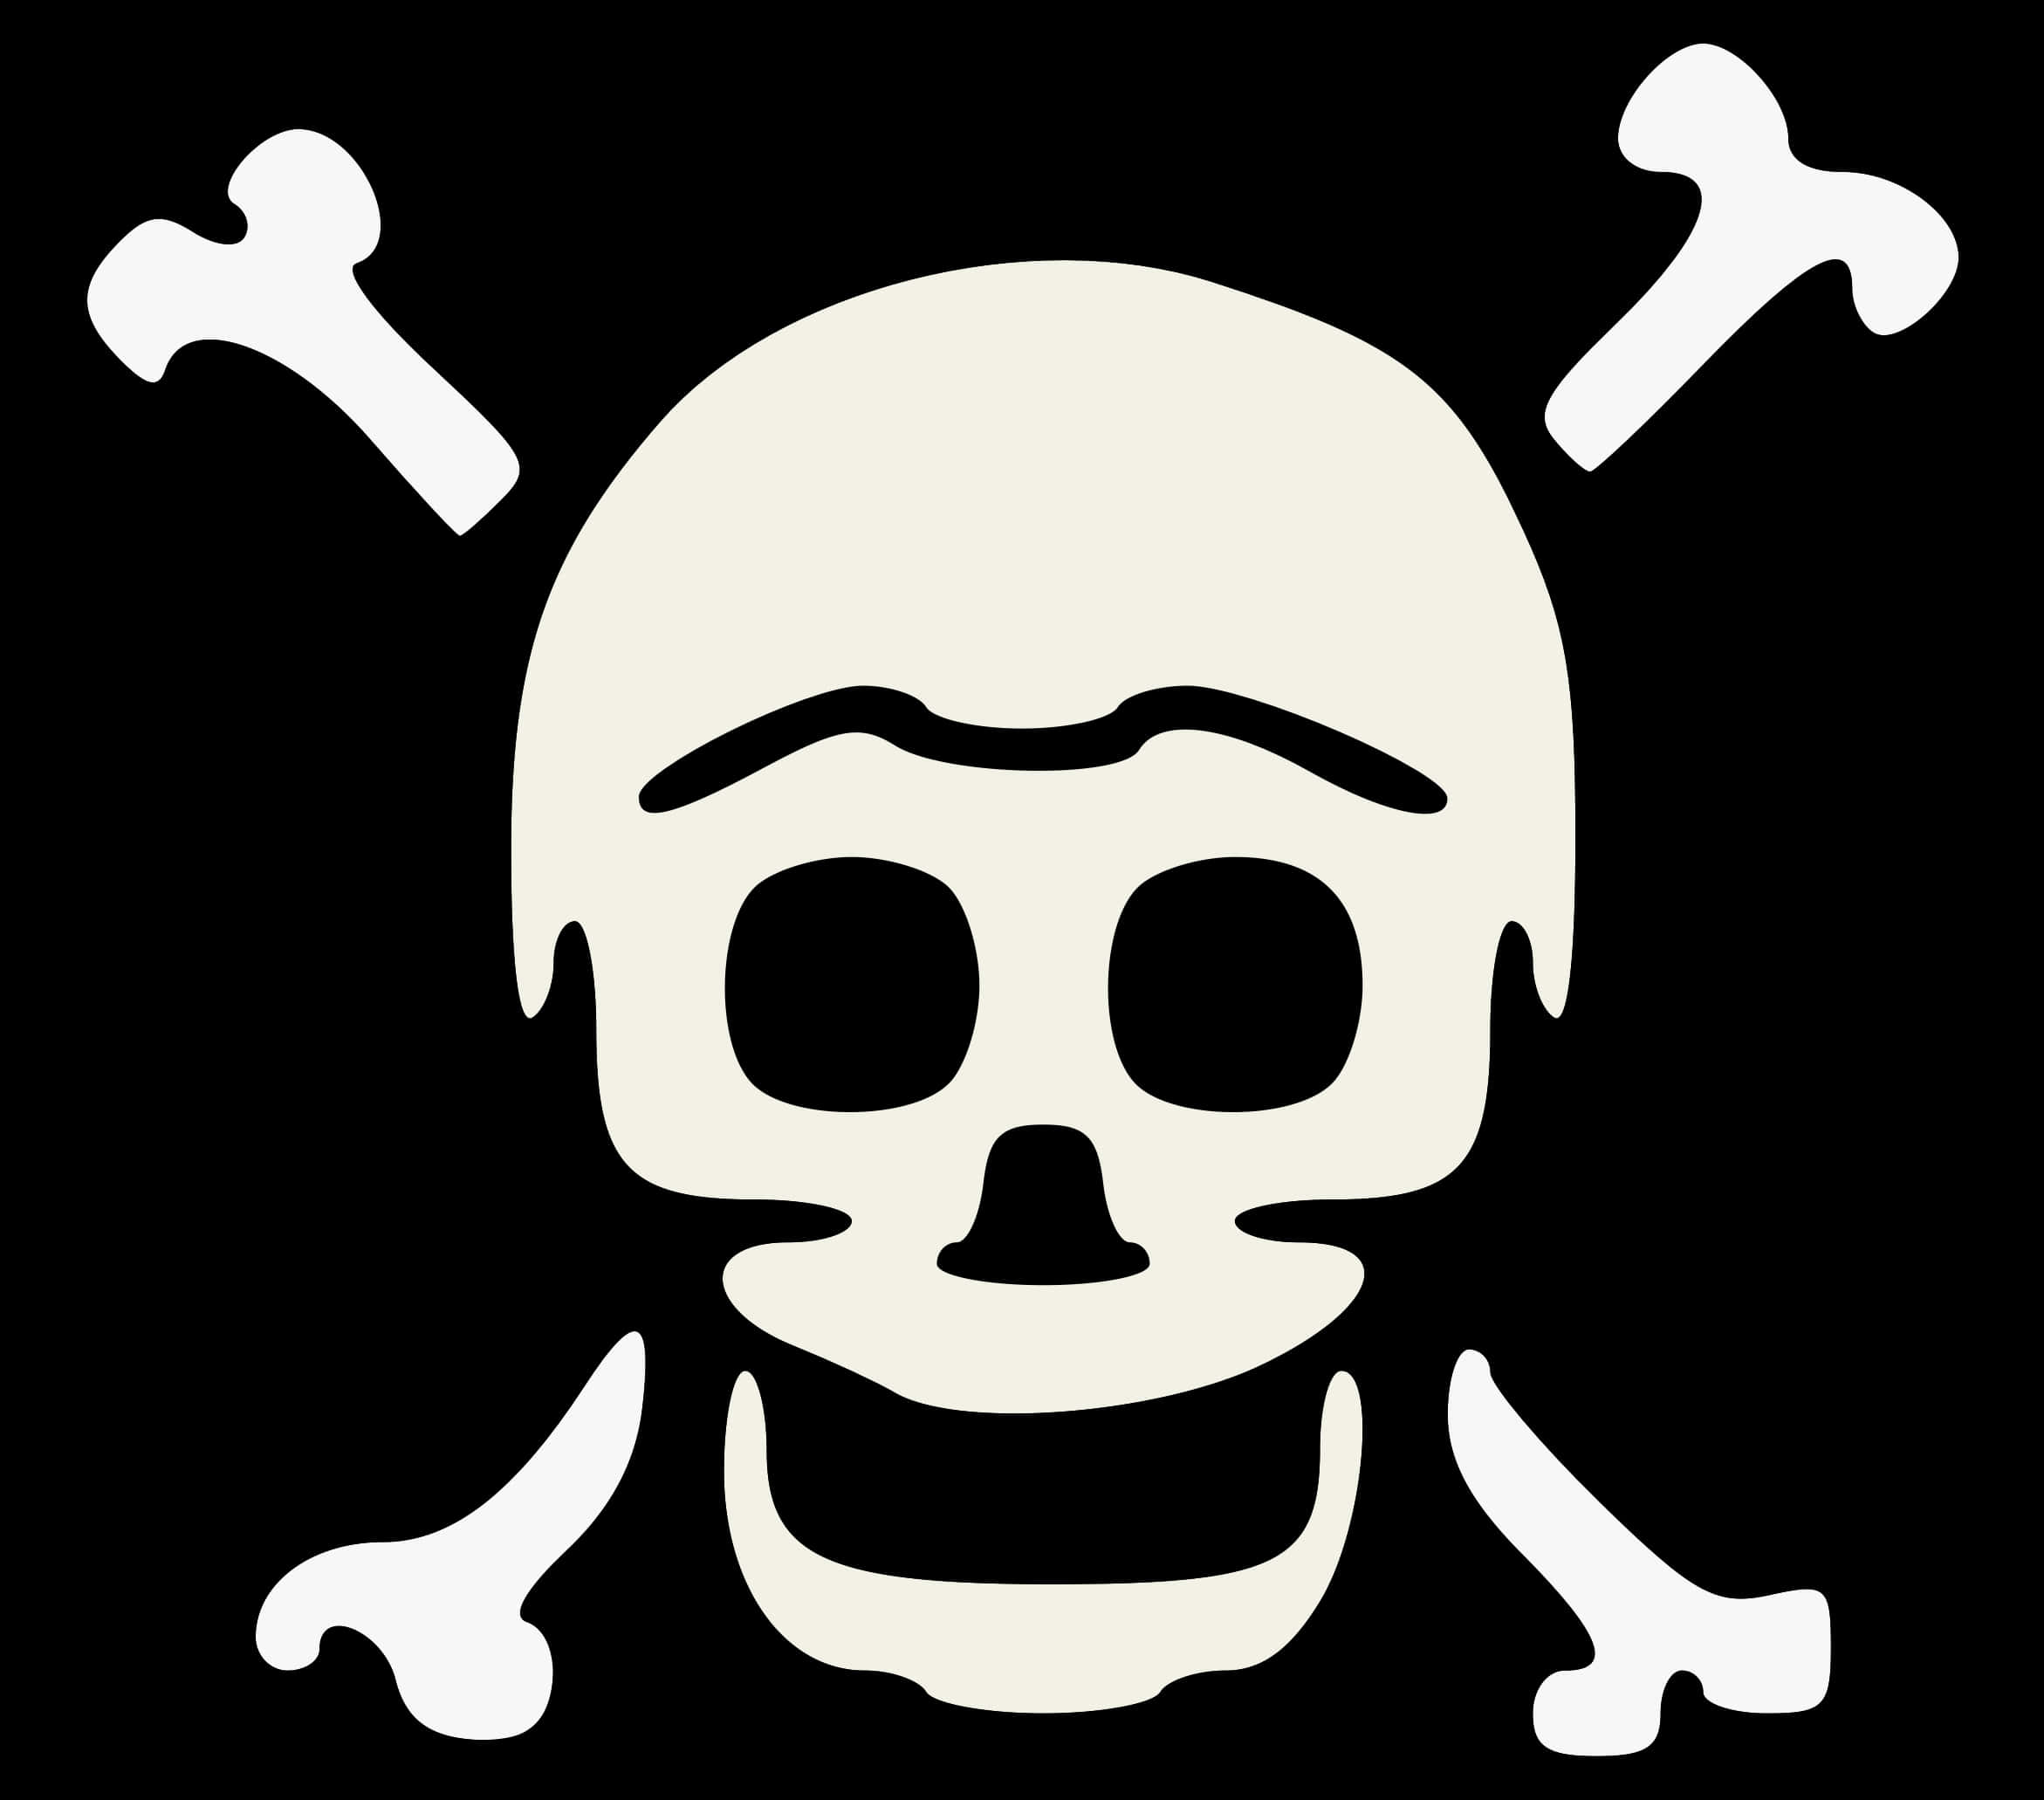 A Skull And Crossbones On A Black Background With Skull And Bones In The Background